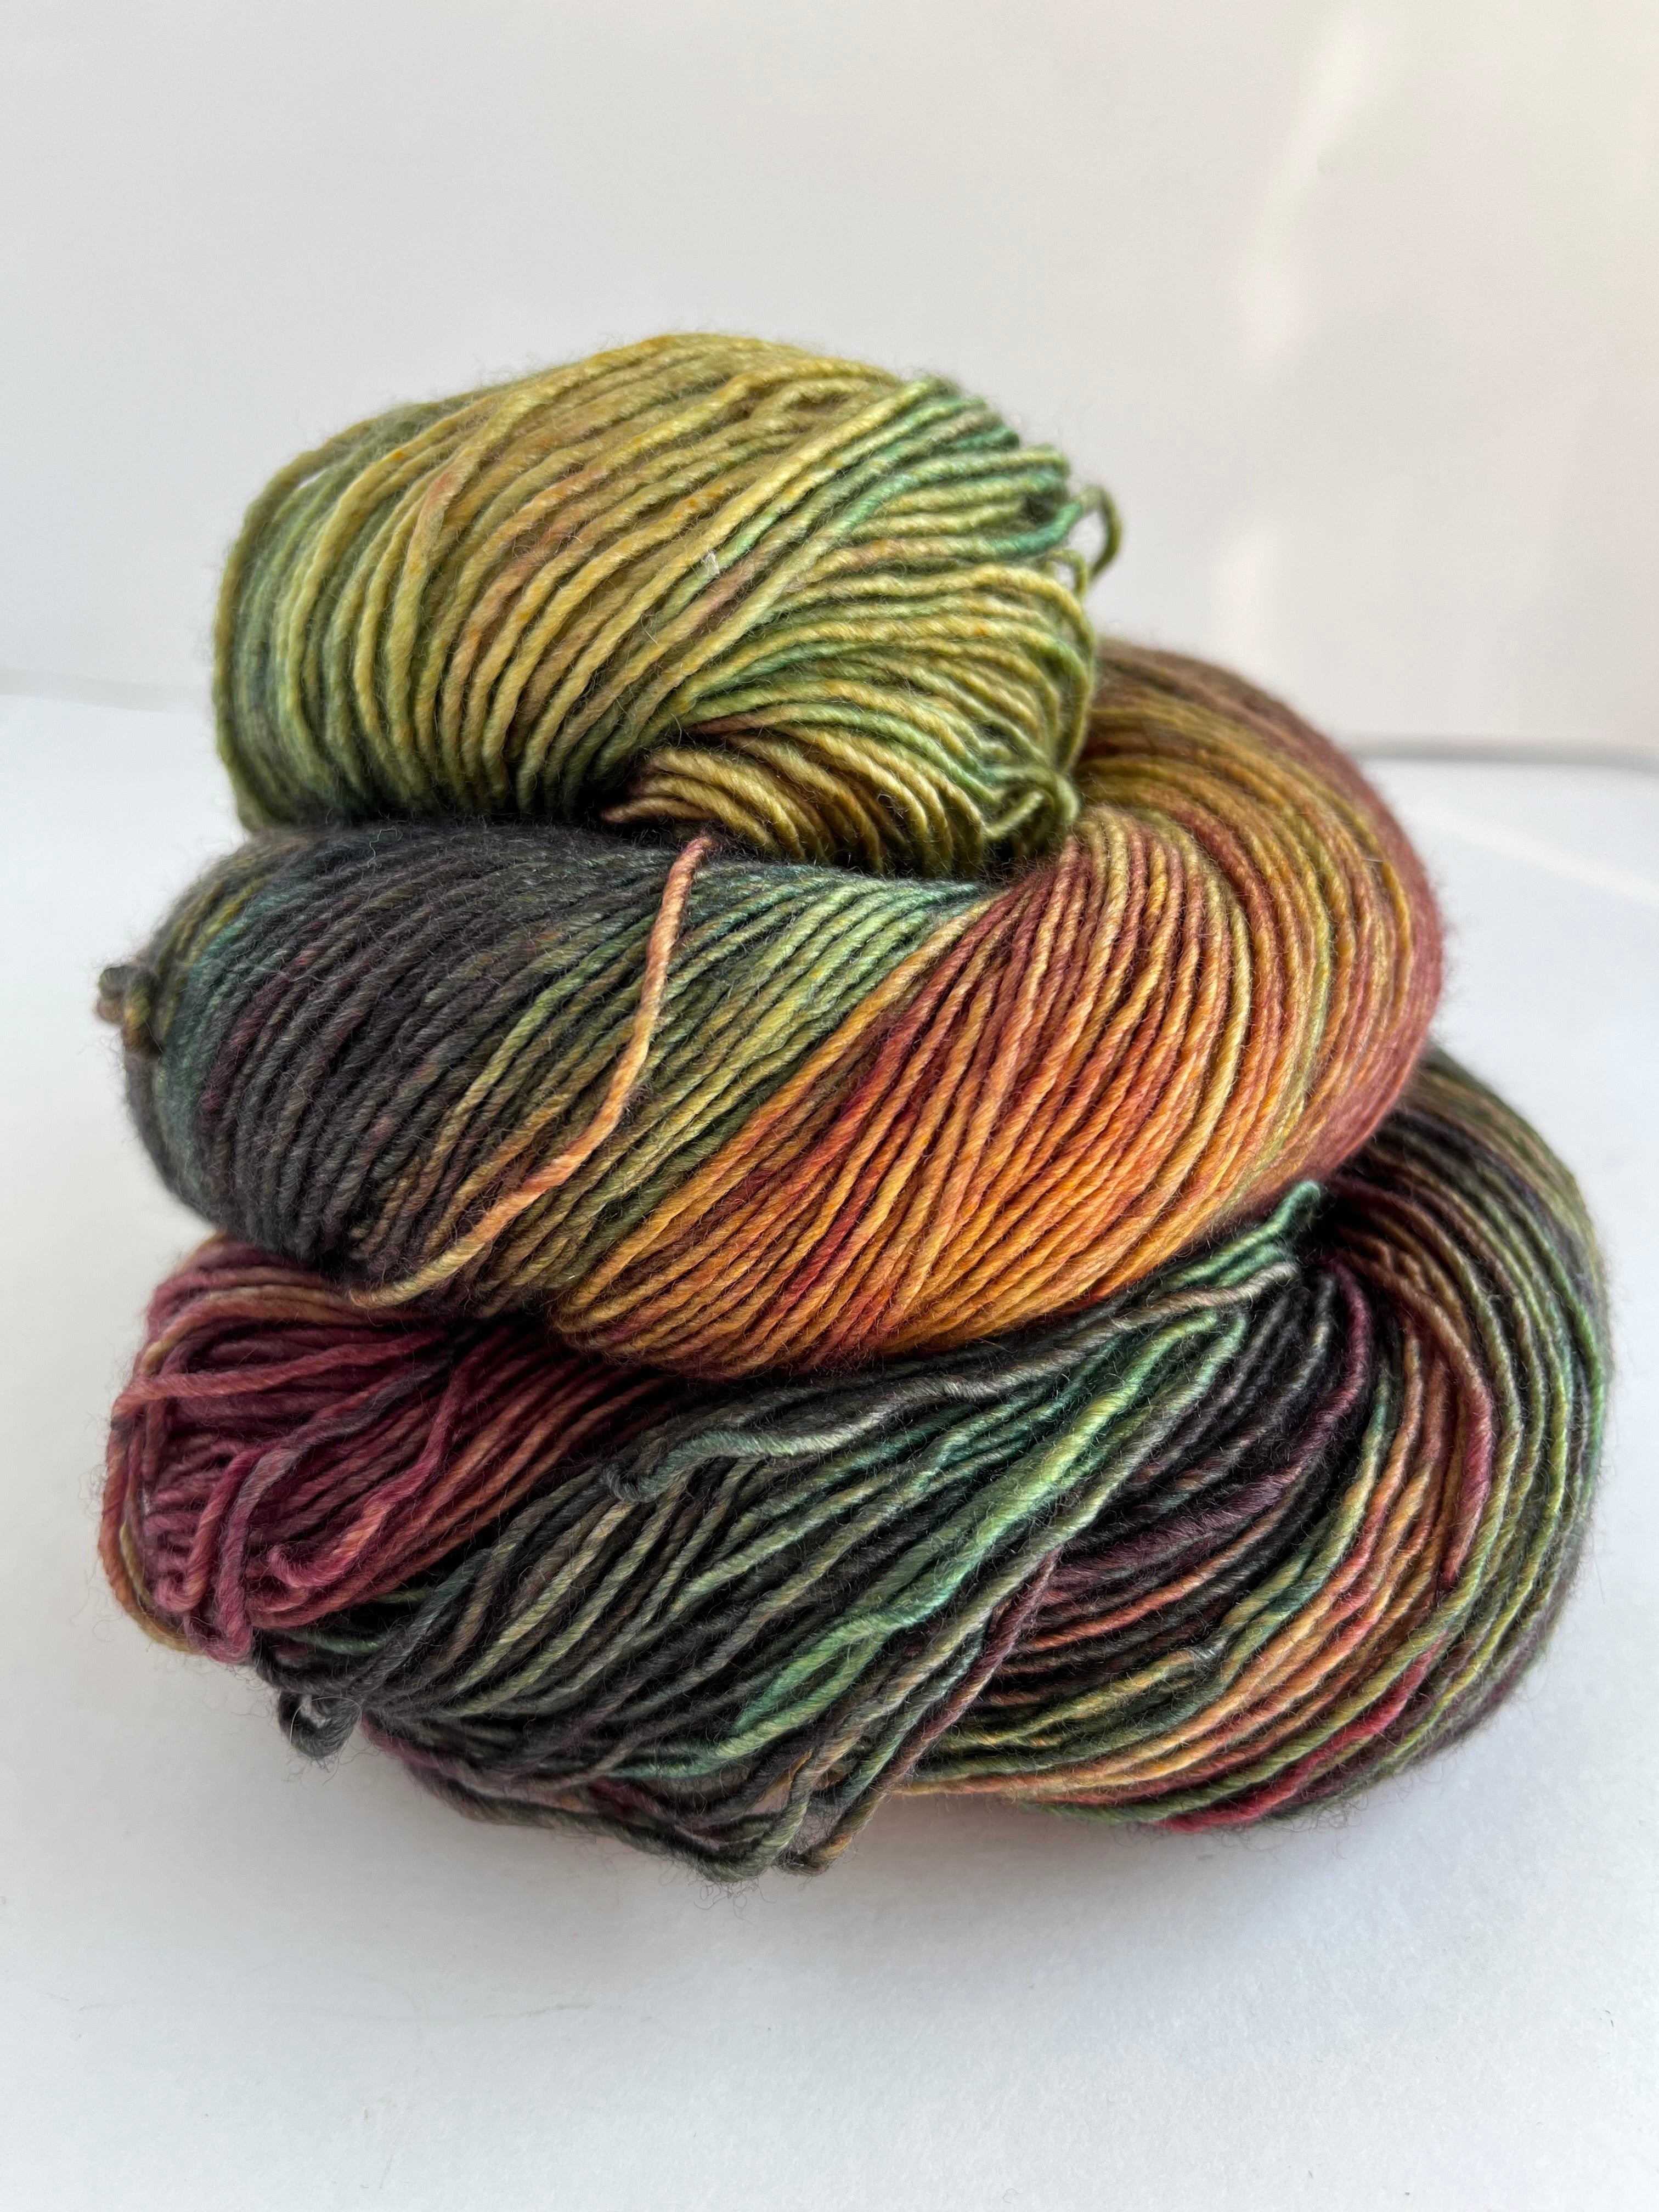 Maple Leaf - River Silk and Merino from Tributary Yarns